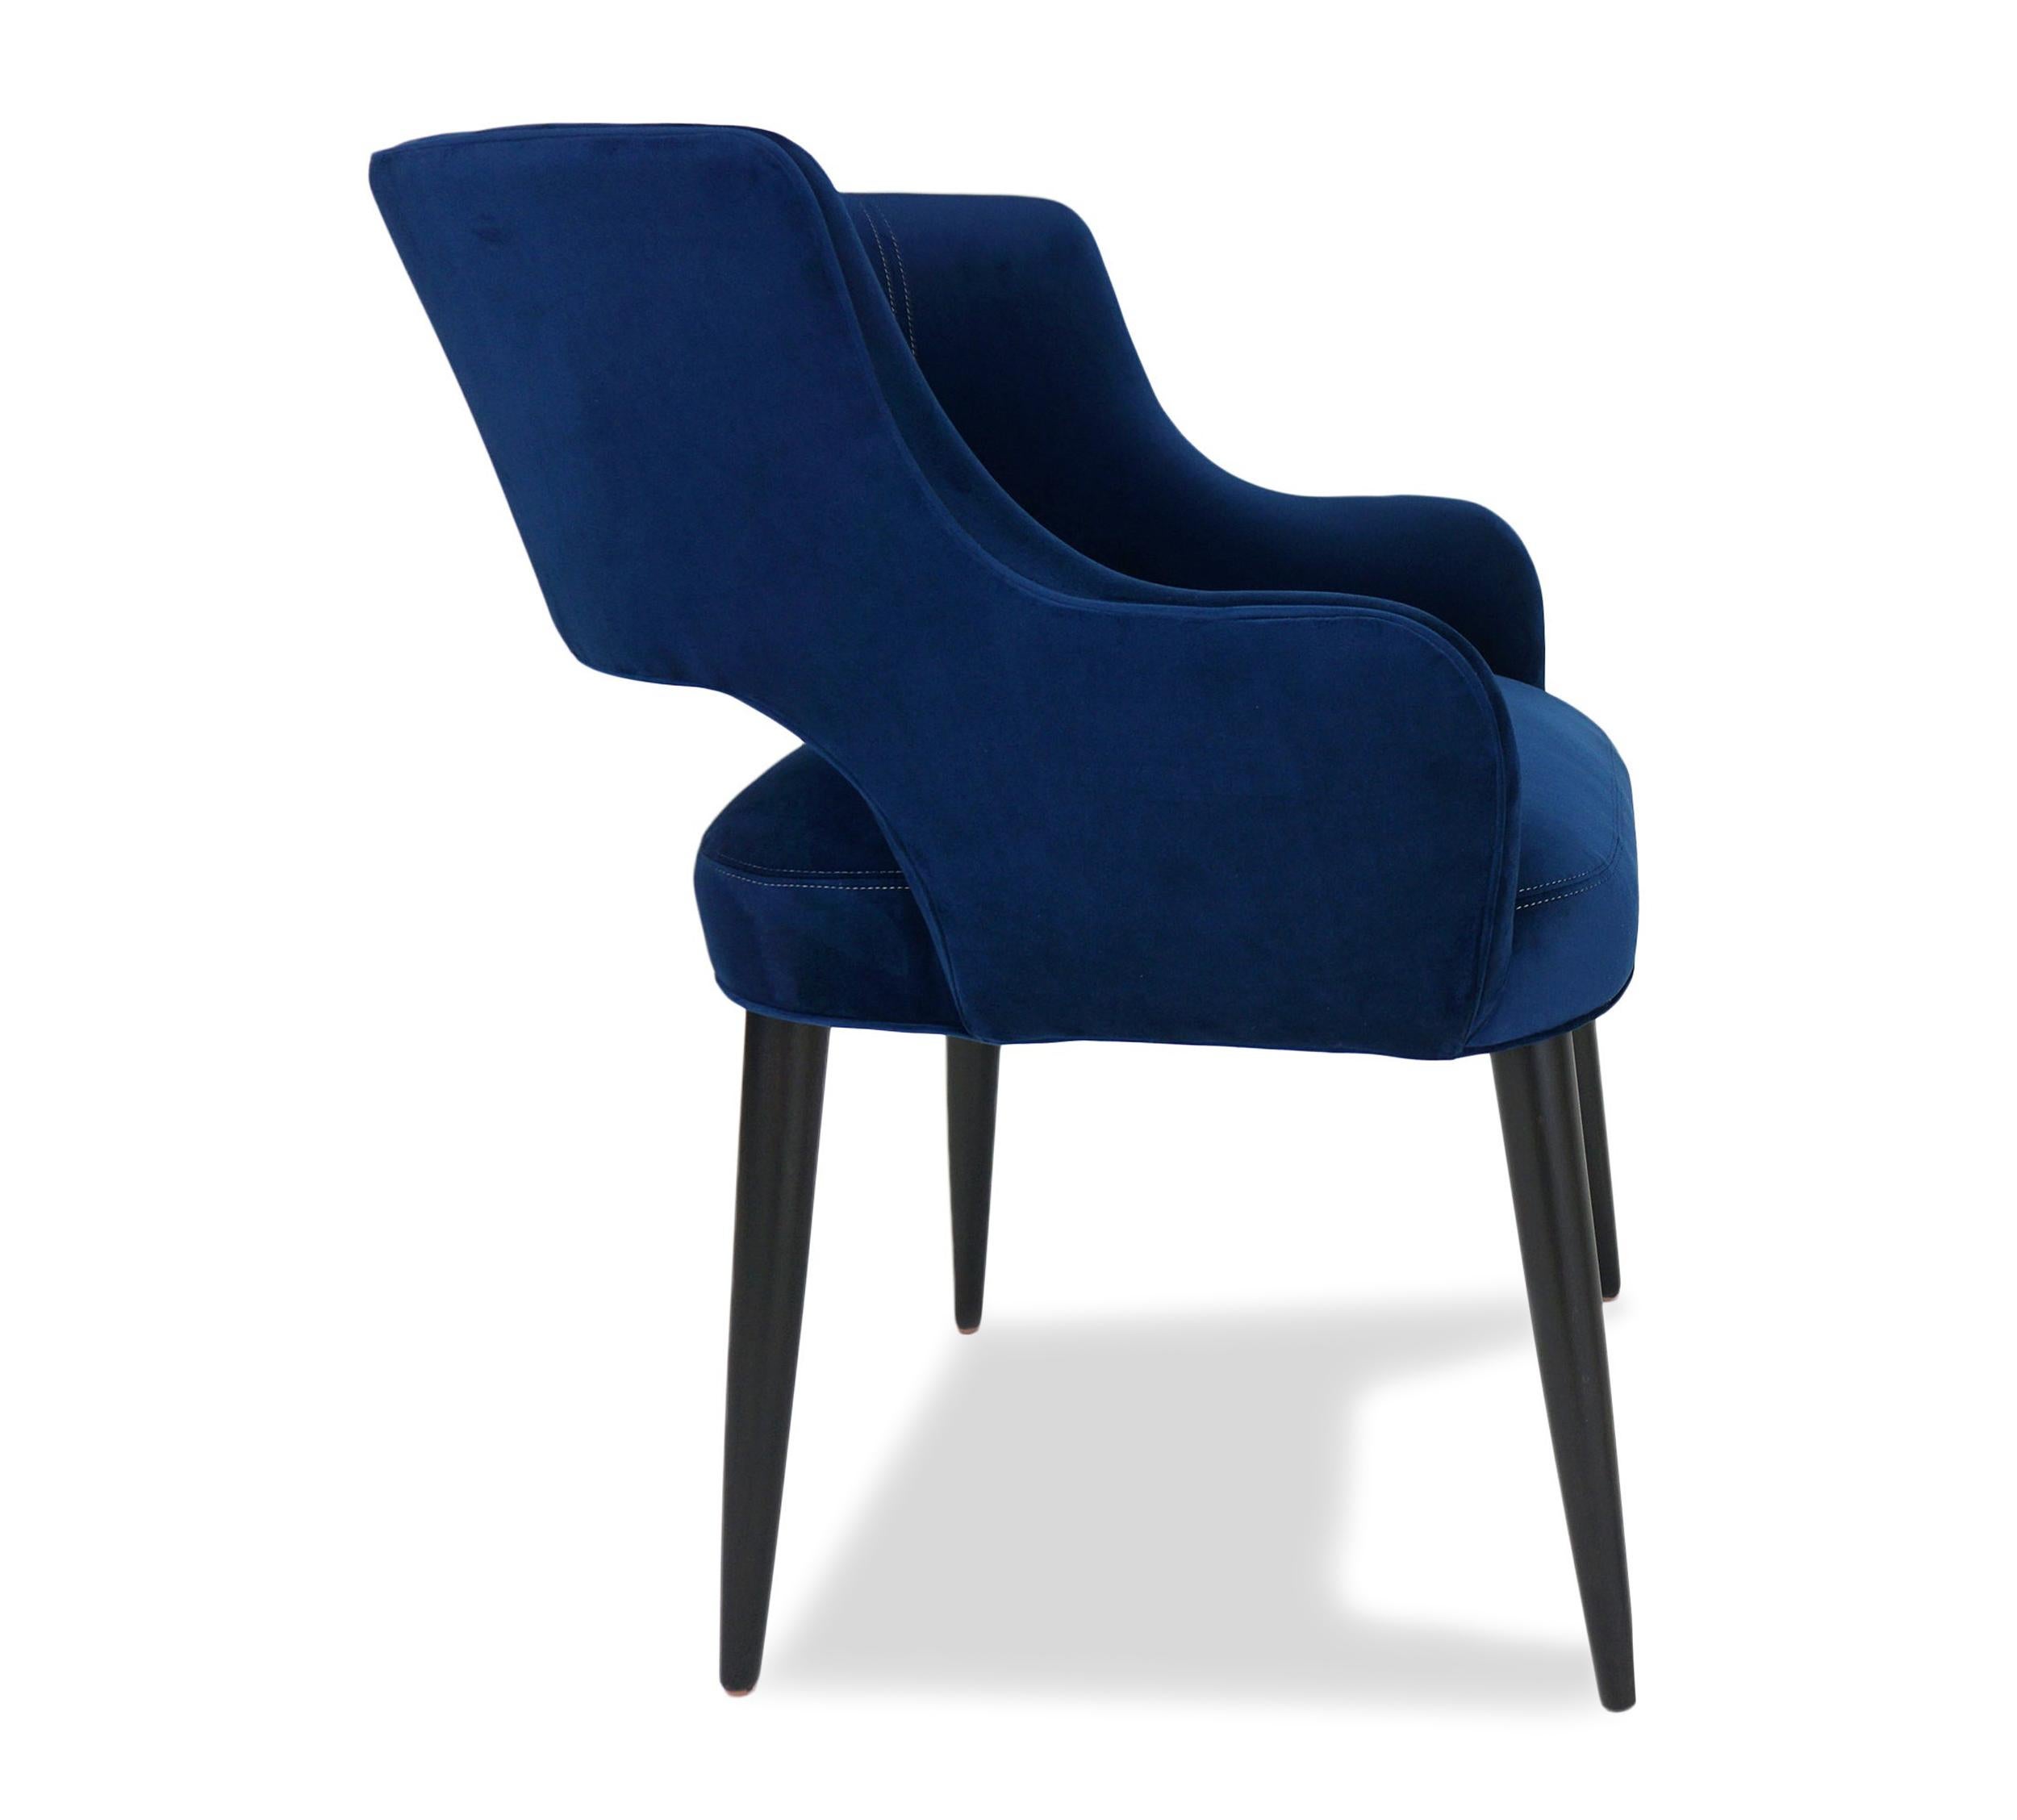 Contemporary Modern Dining Chair with Sloping Arms and Relaxed Pitch For Sale